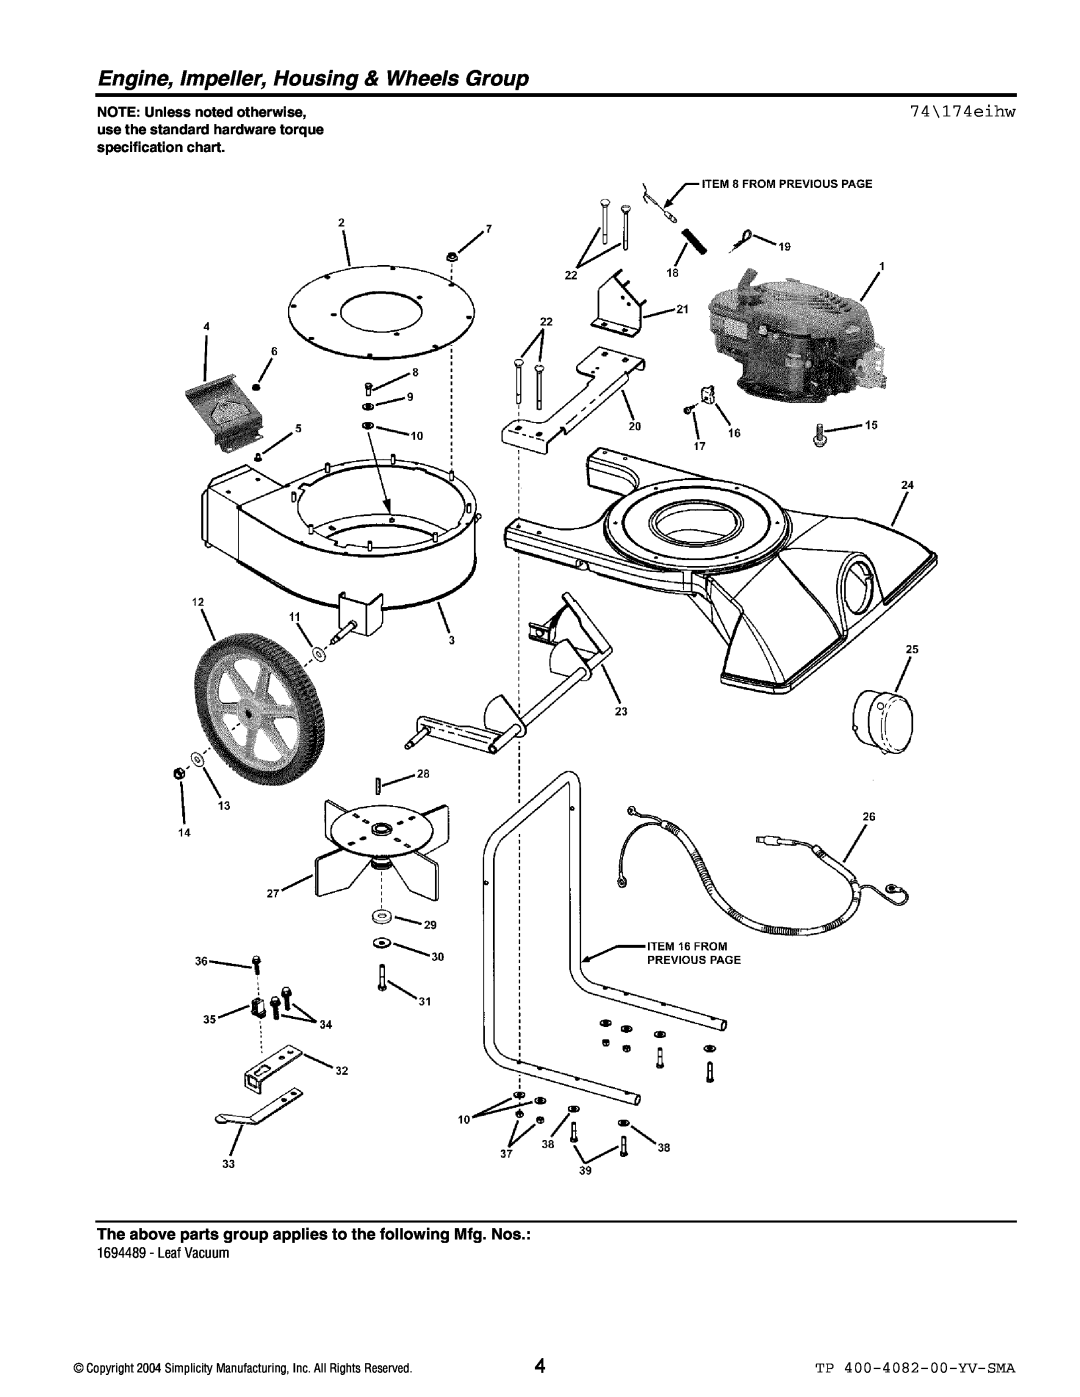 Simplicity 1694489 manual Engine, Impeller, Housing & Wheels Group, 74\174eihw, TP 400-4082-00-YV-SMA, specification chart 